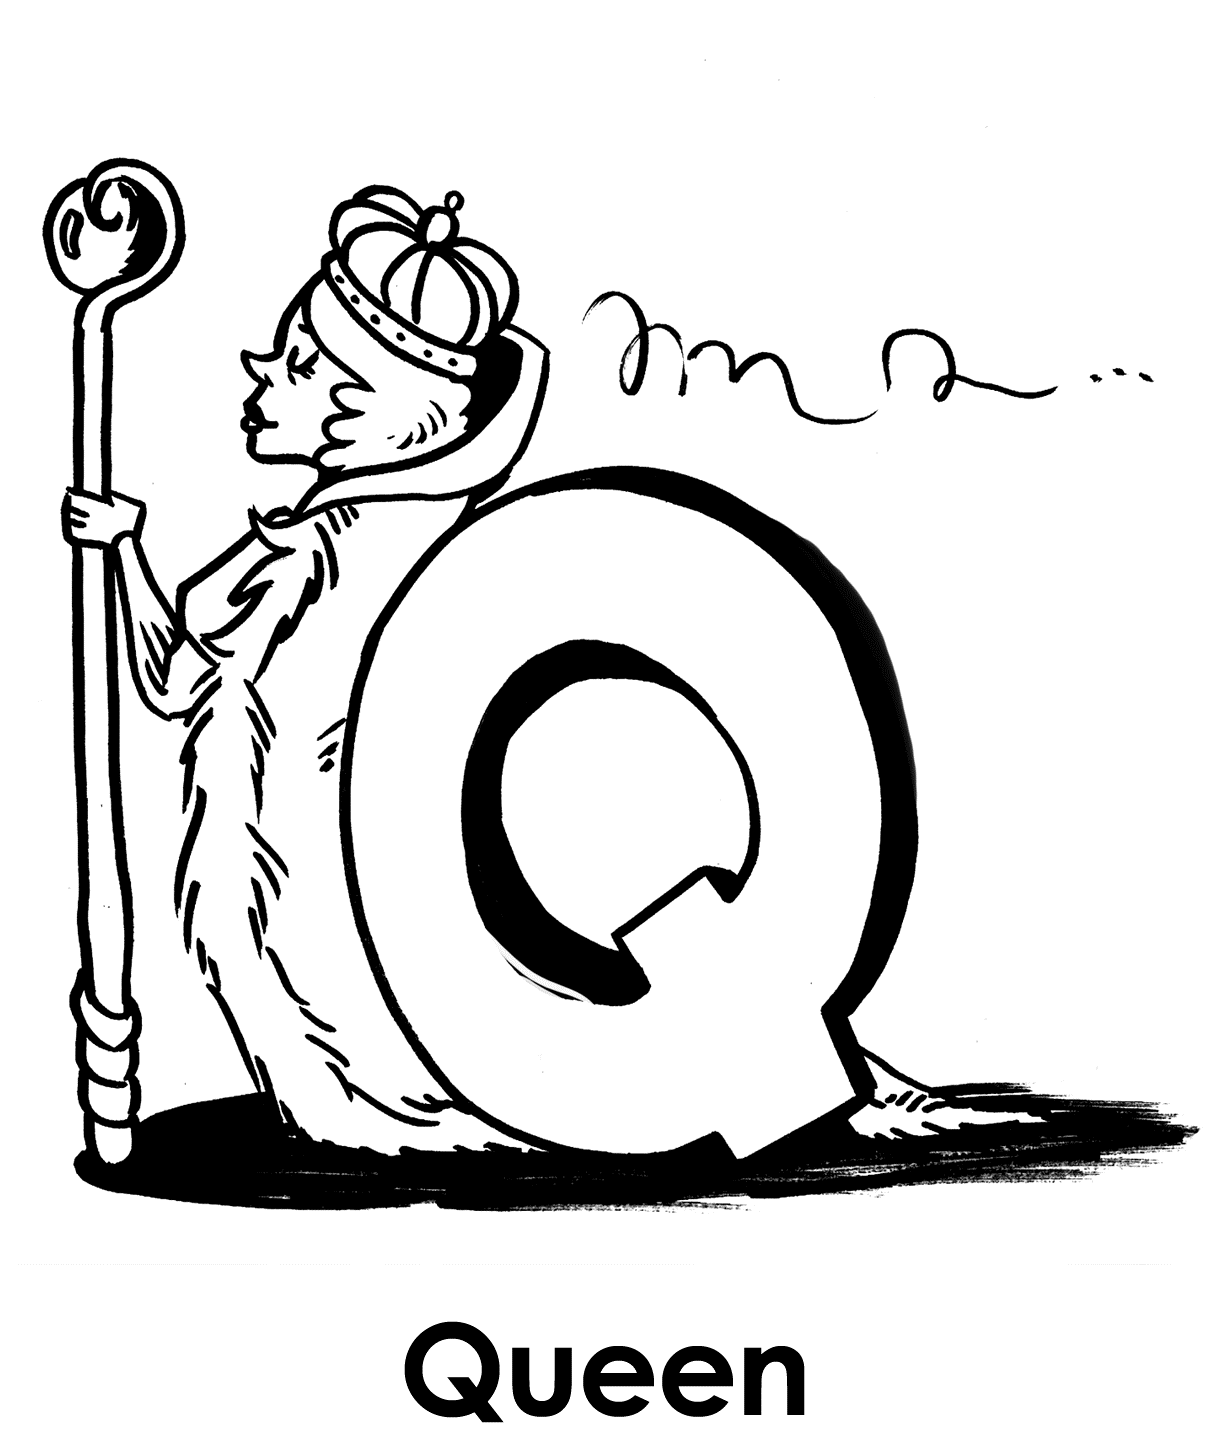 Alphabet Coloring Pages Queen | Alphabet Coloring pages of ...